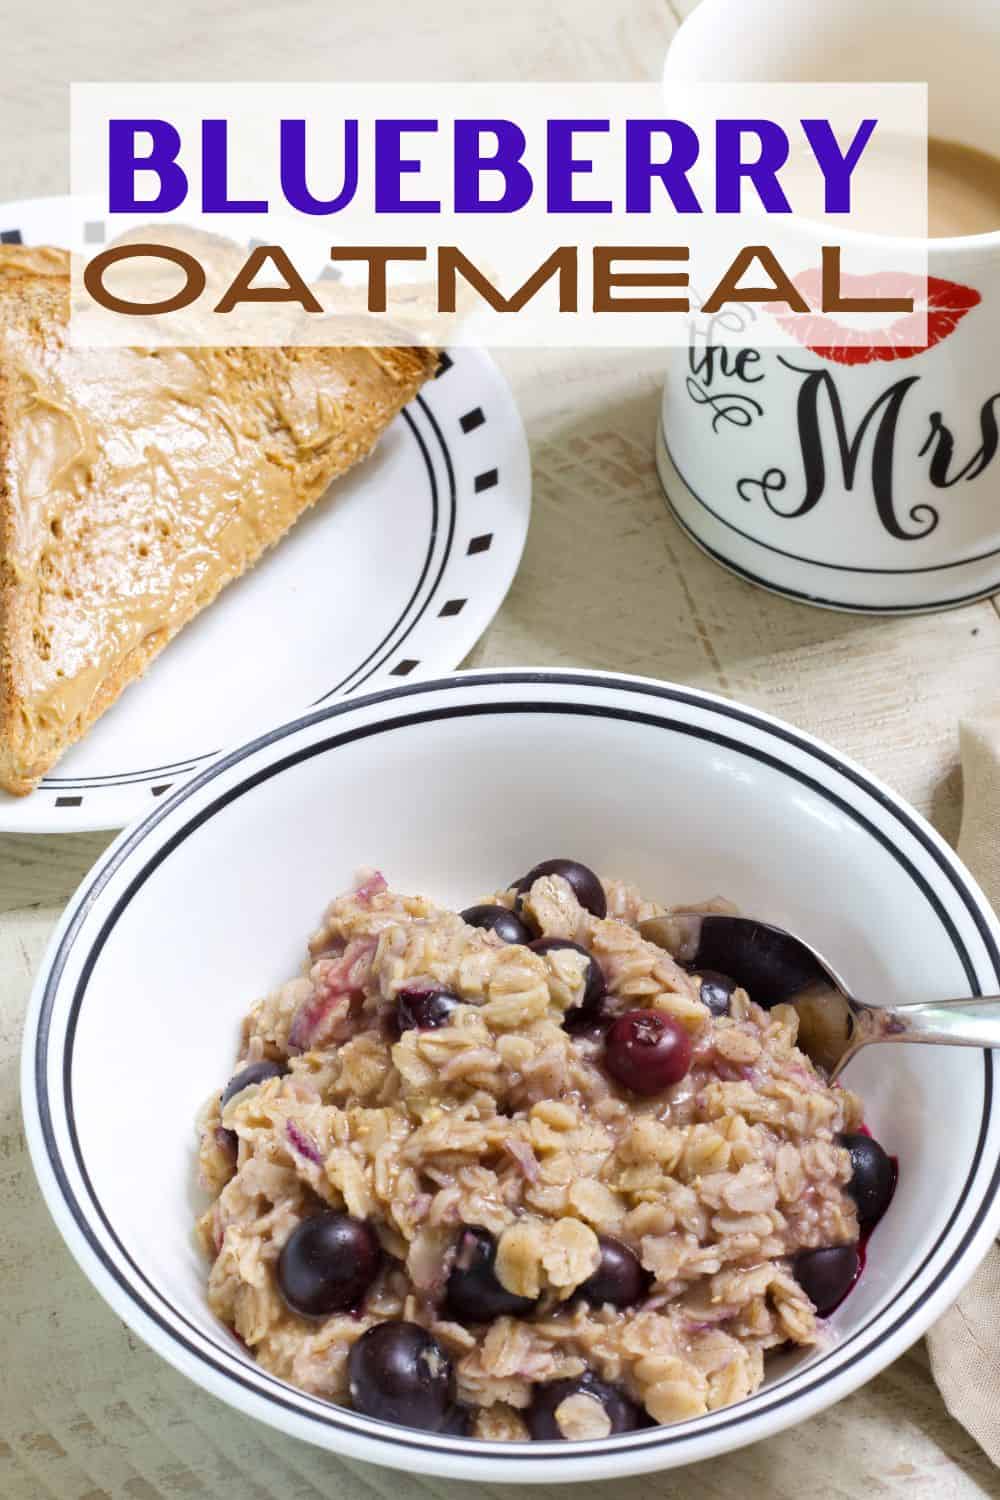 Easy Blueberry Oatmeal Recipe is a healthy, quick, high nutrient, low calorie breakfast. Perfect for weight loss or a healthy meal plan. #healthybreakfast #weightloss #blueberryoatmeal #easyrecipe via @mindyscookingobsession